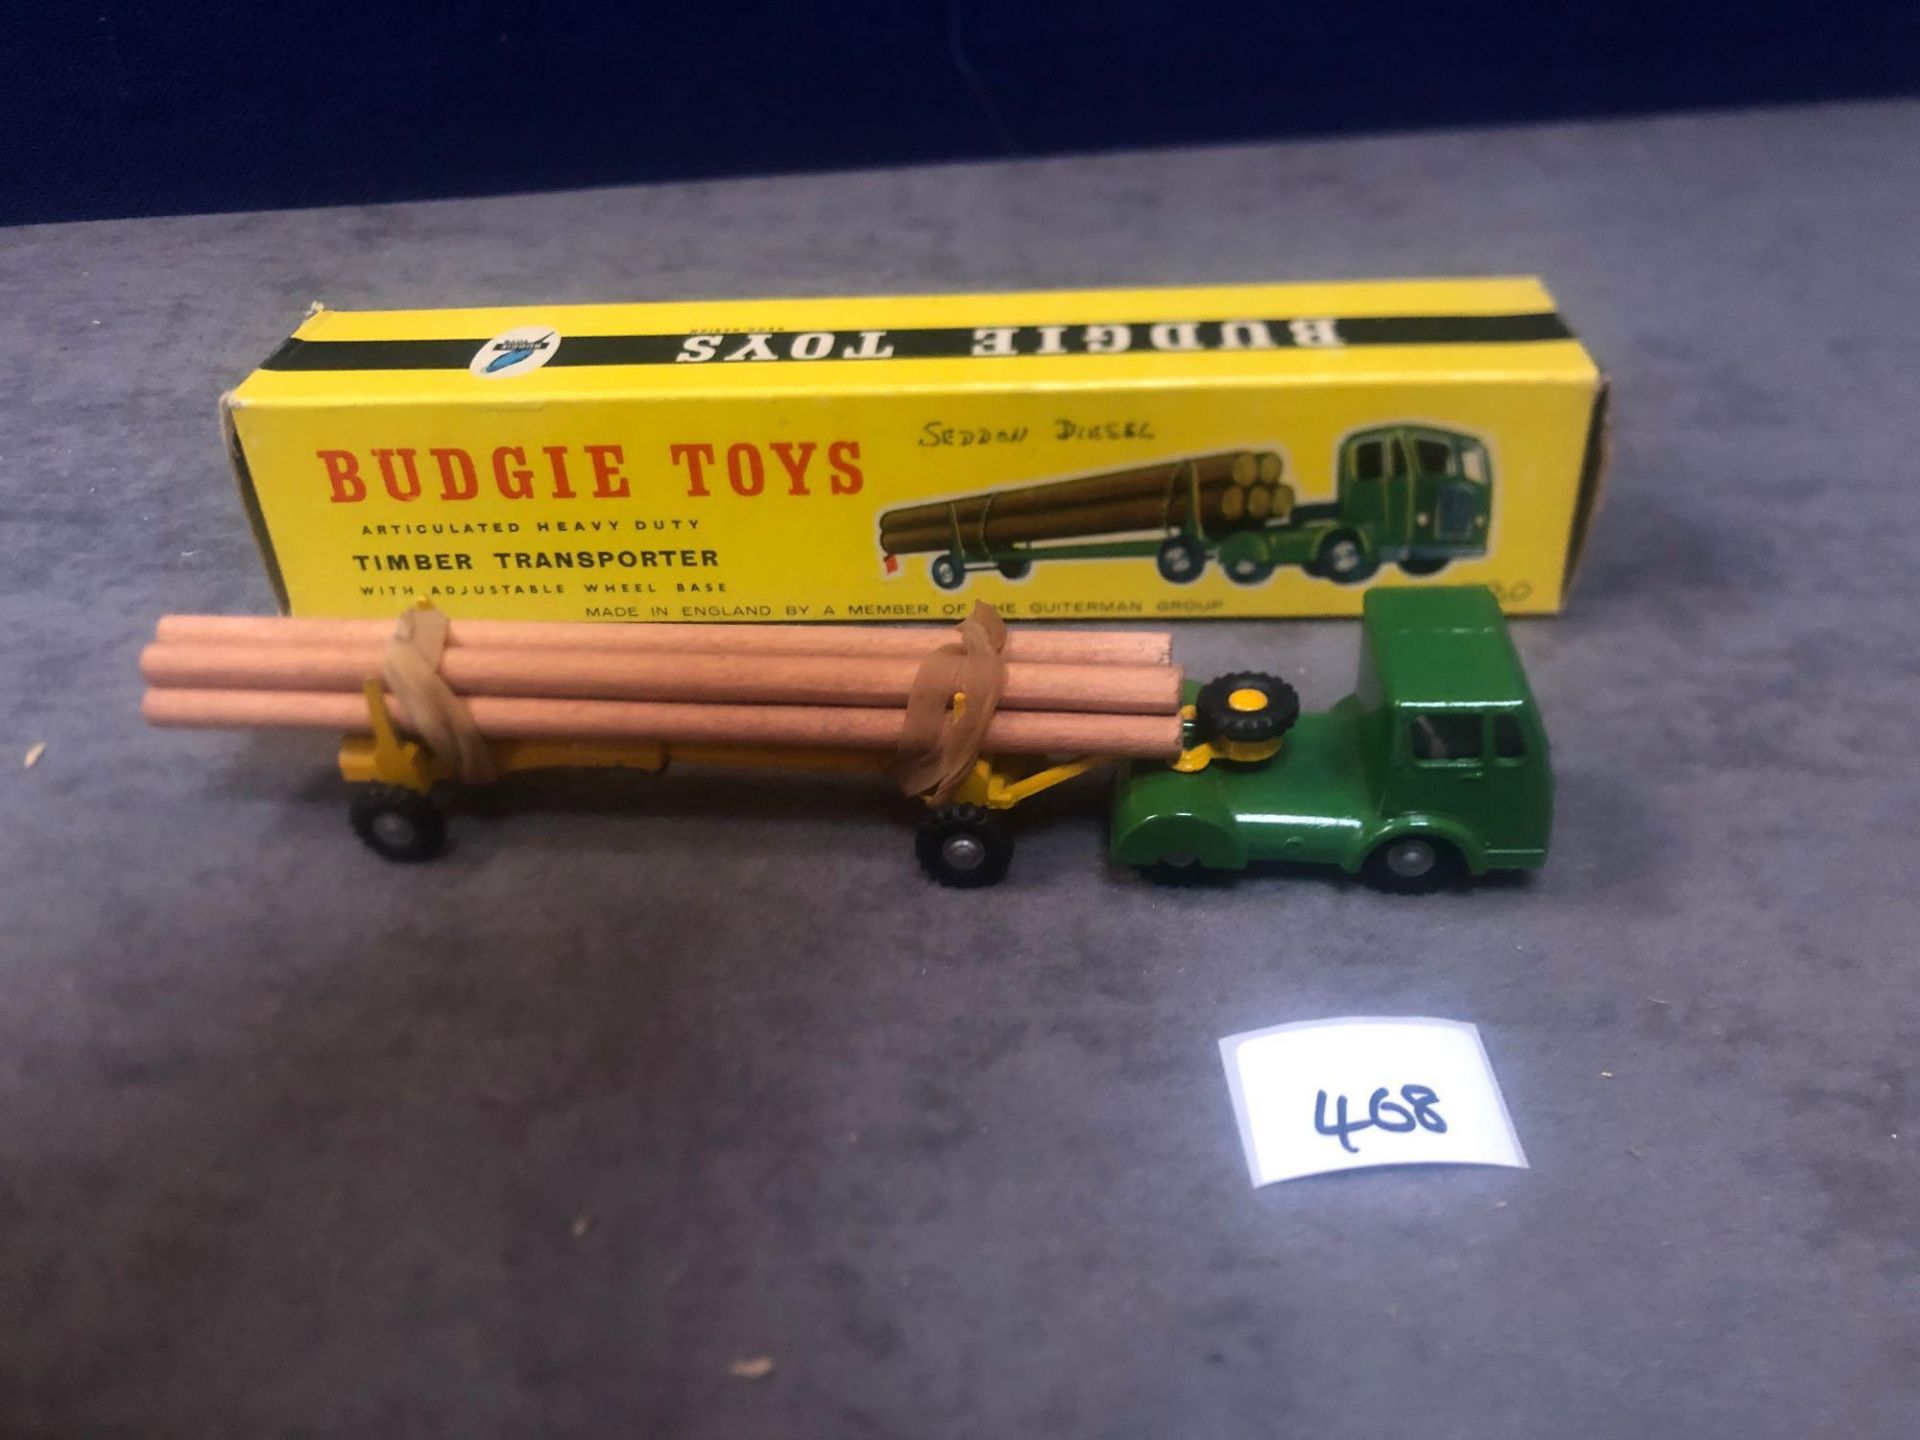 Budgie Toys No.230 Timber Transporter Issued 1959-66 Length 178mm Mint In Firm Solid Box